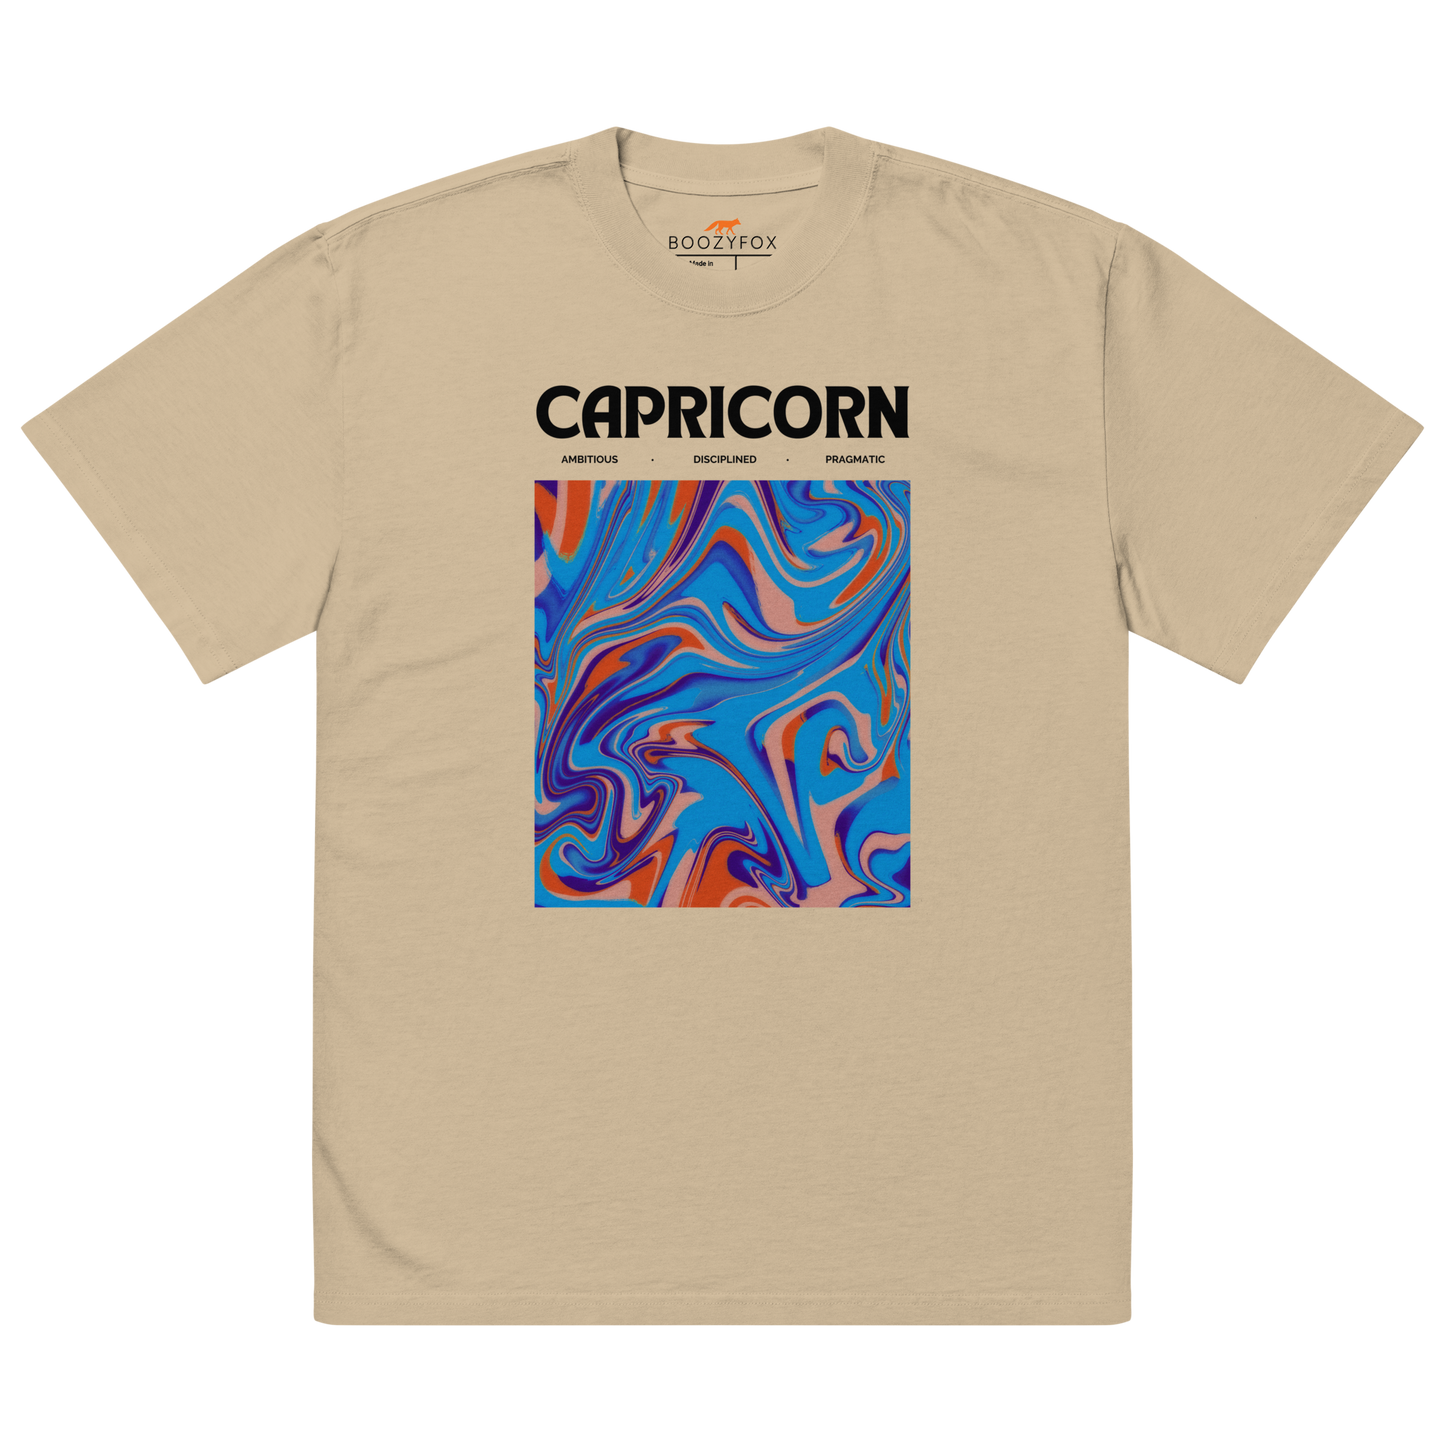 Faded Khaki Capricorn Oversized T-Shirt featuring an Abstract Capricorn Star Sign graphic on the chest - Cool Graphic Zodiac Oversized Tees - Boozy Fox